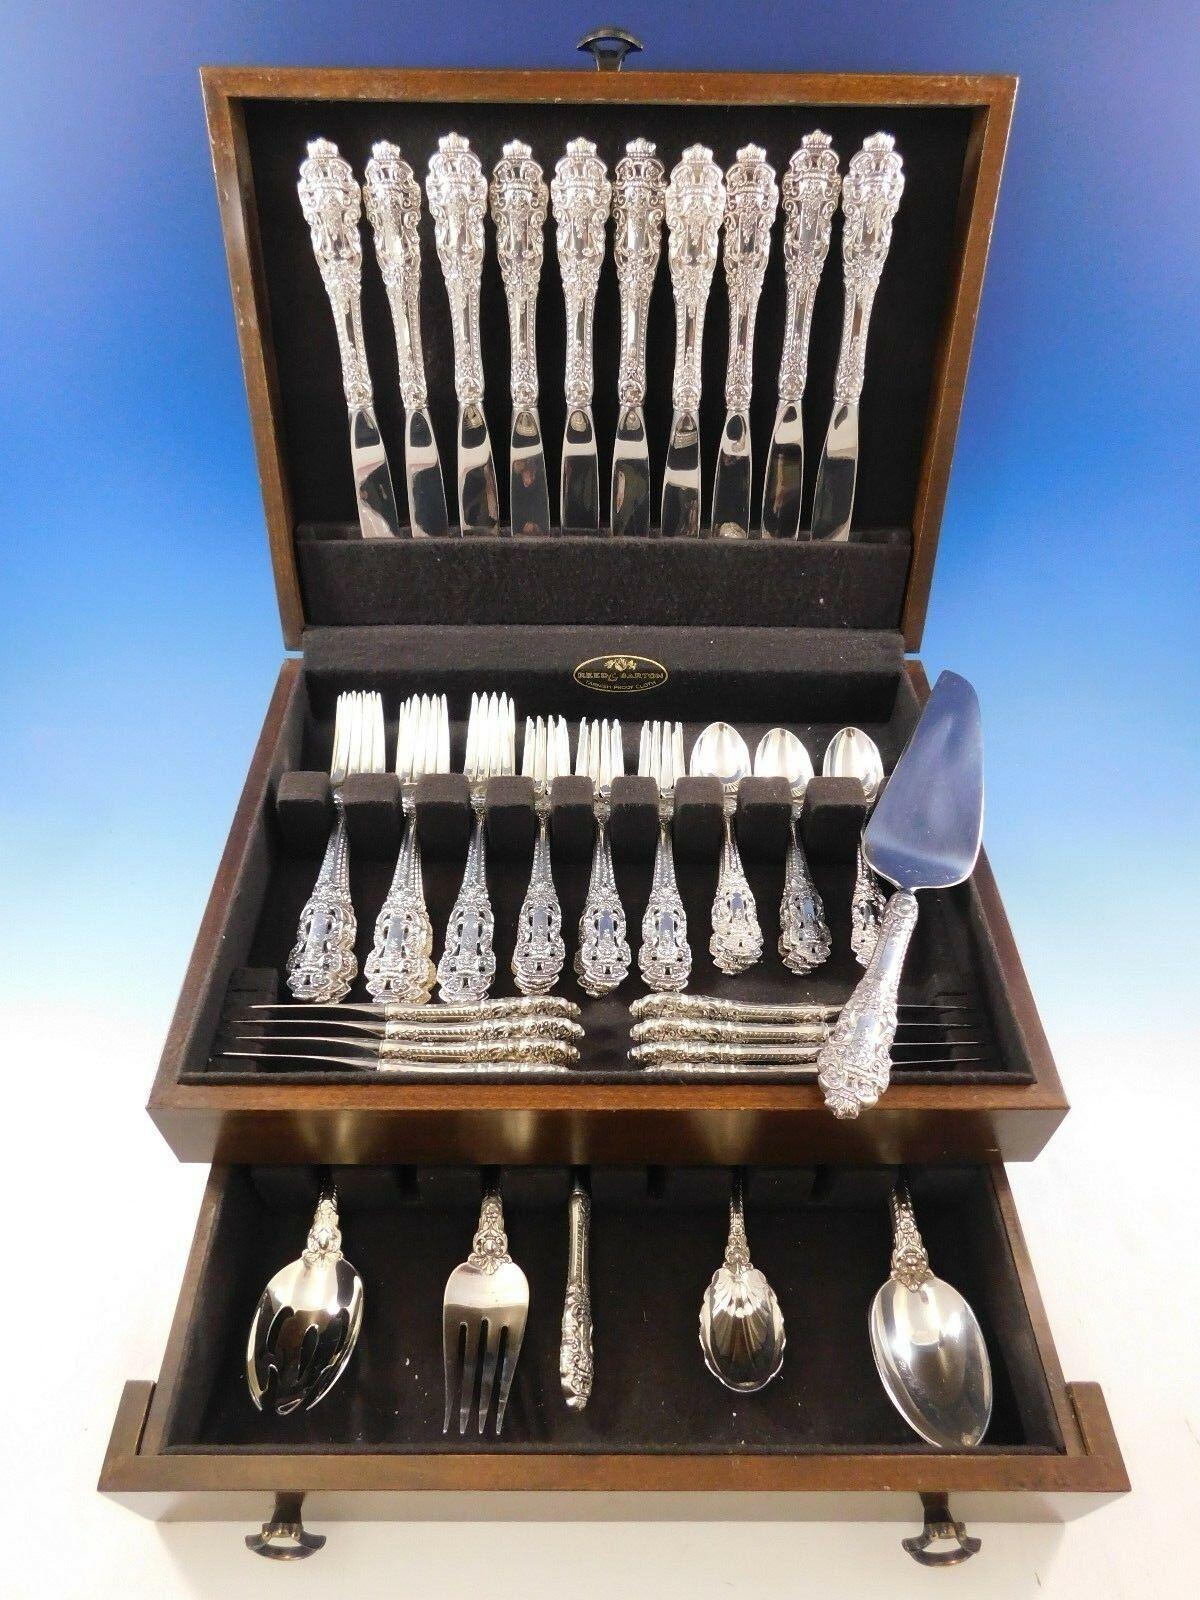 Impressive dinner size crown Baroque by Gorham sterling silver flatware set - 57 pieces. This set includes:

10 dinner knives, 9 7/8